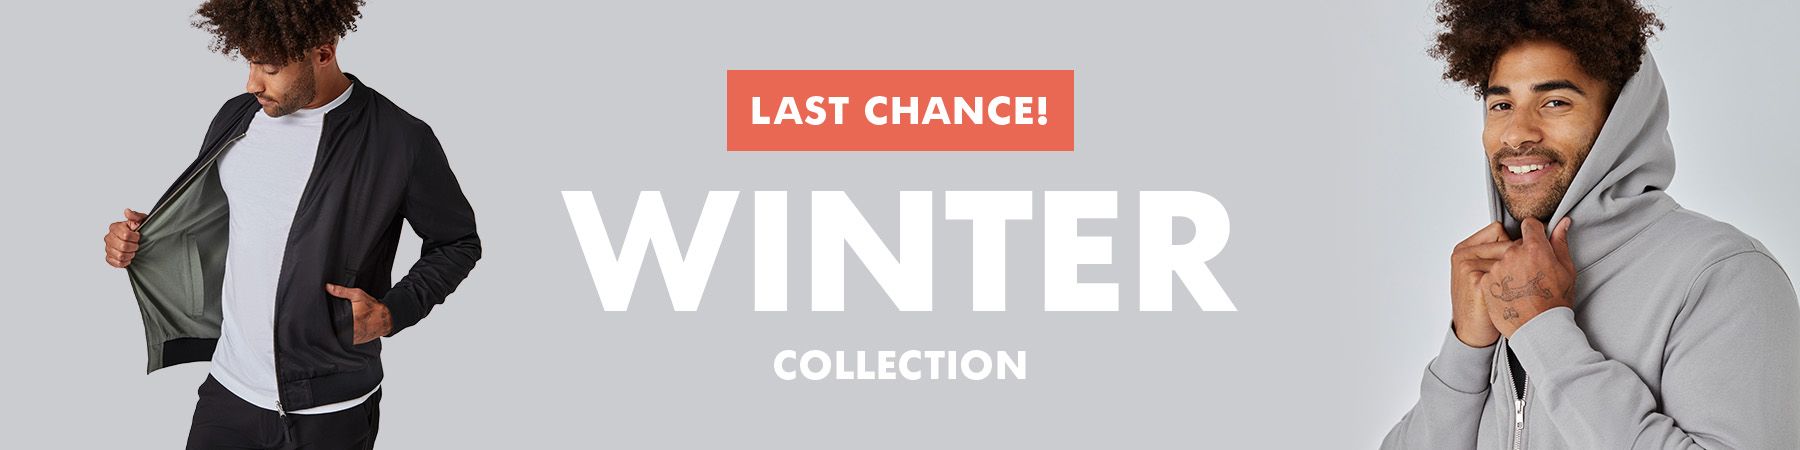 Last Chance for the Winter Collection! | Fresh Clean Threads